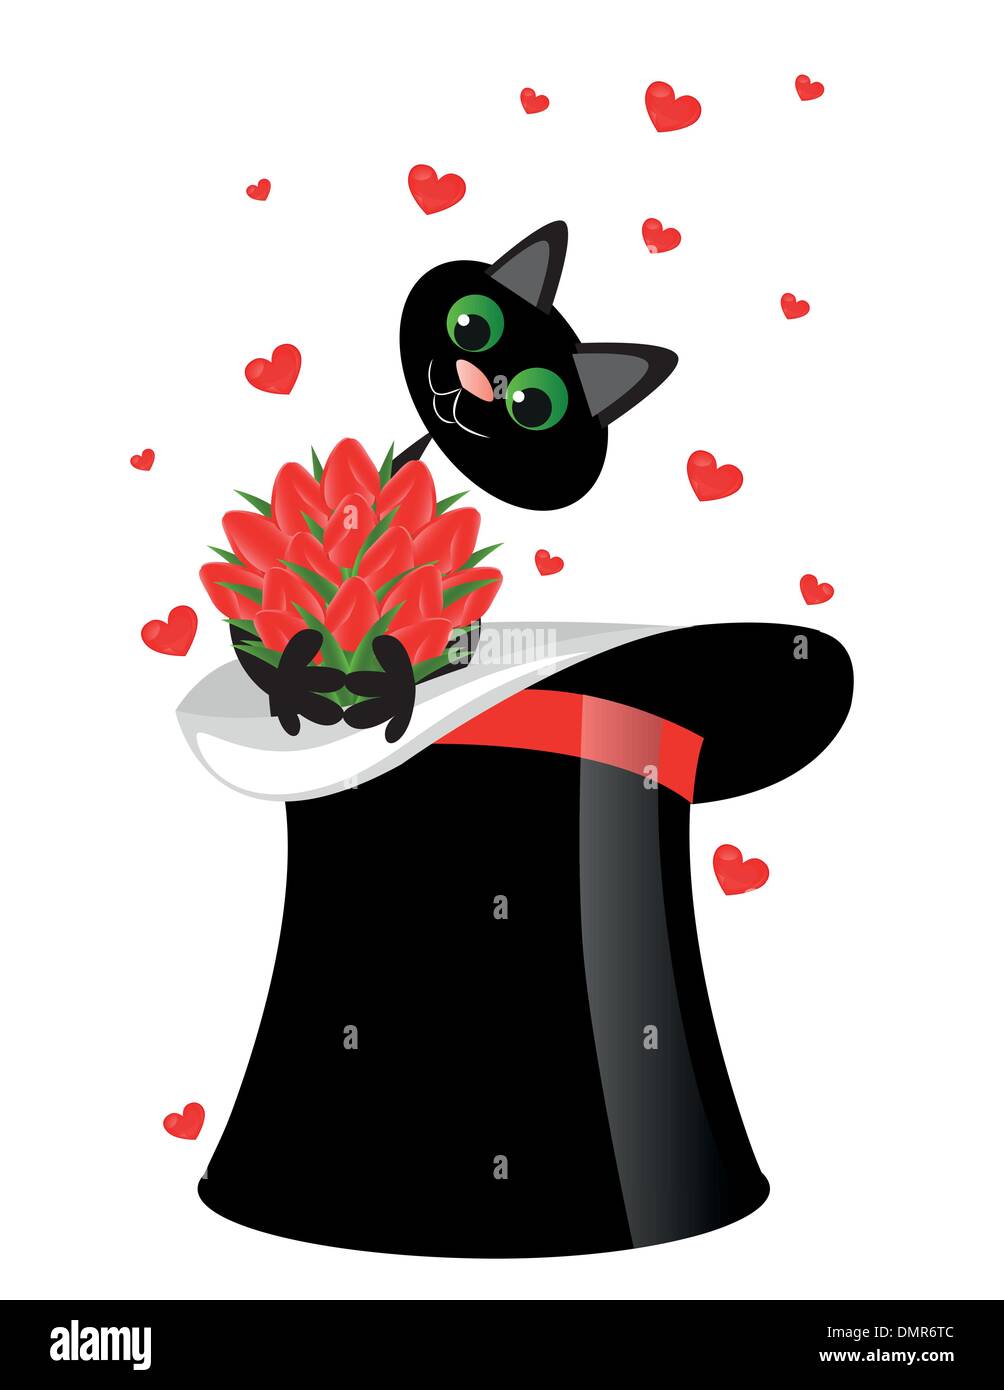 cat holding a flowers Stock Vector